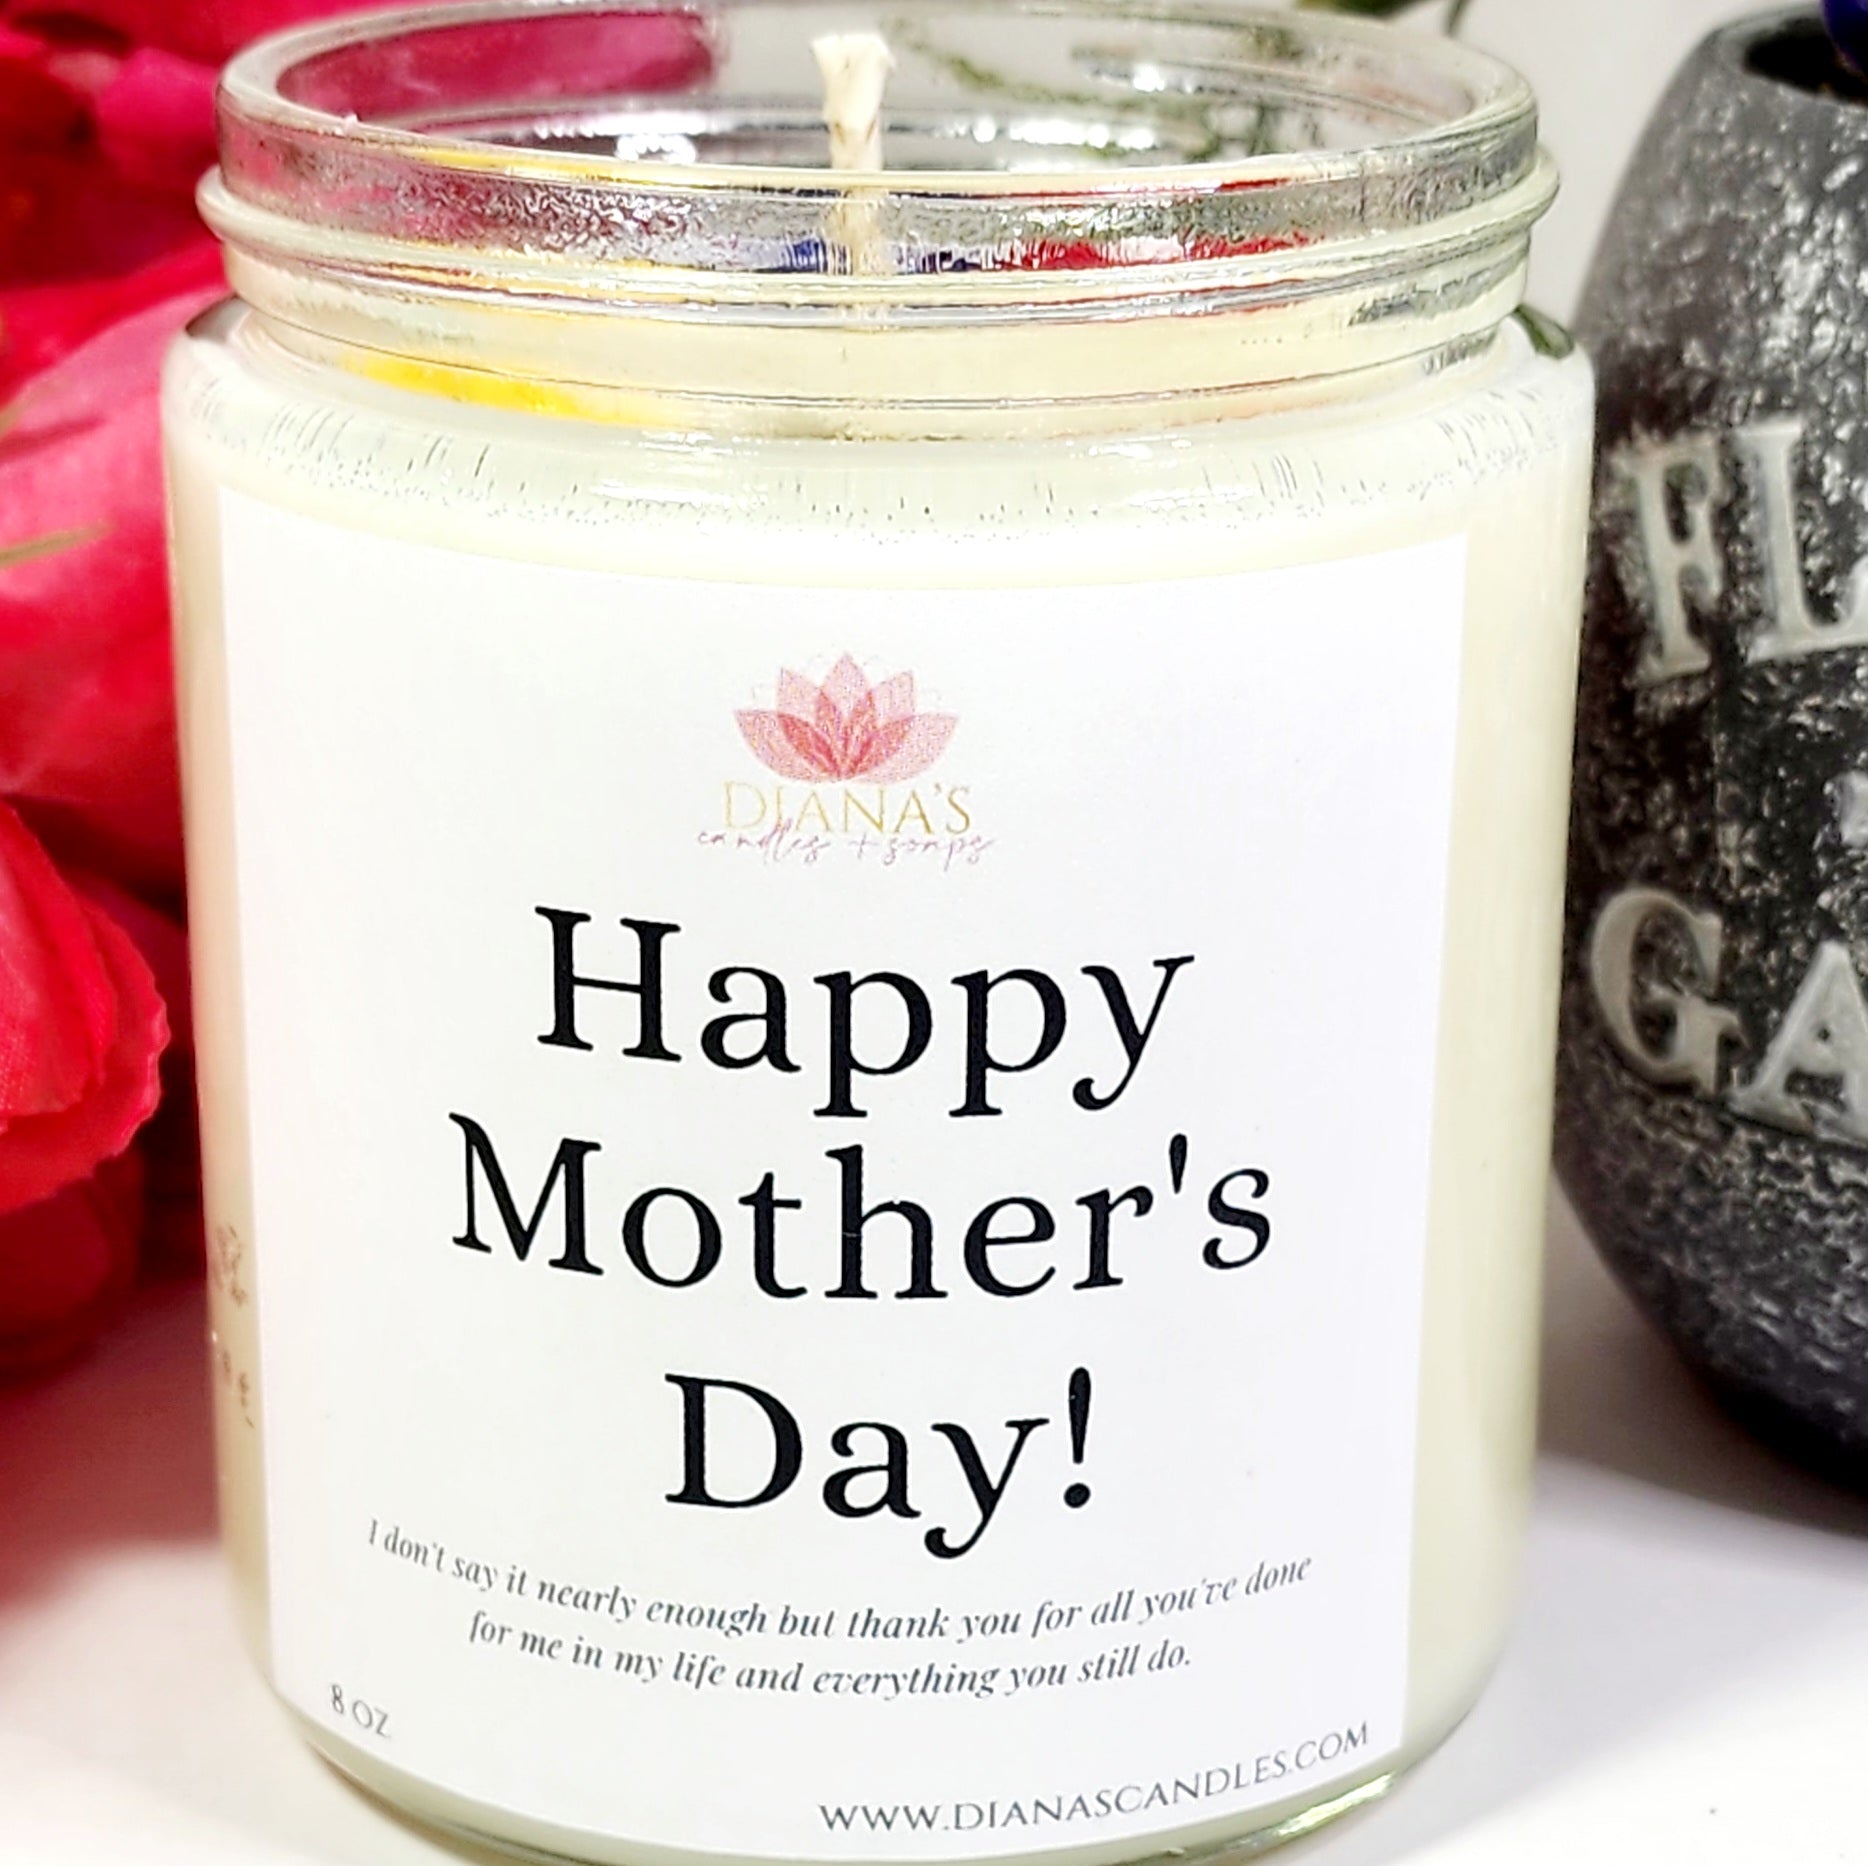 Happy Mother's Day Candle Diana's Candles and Soaps 